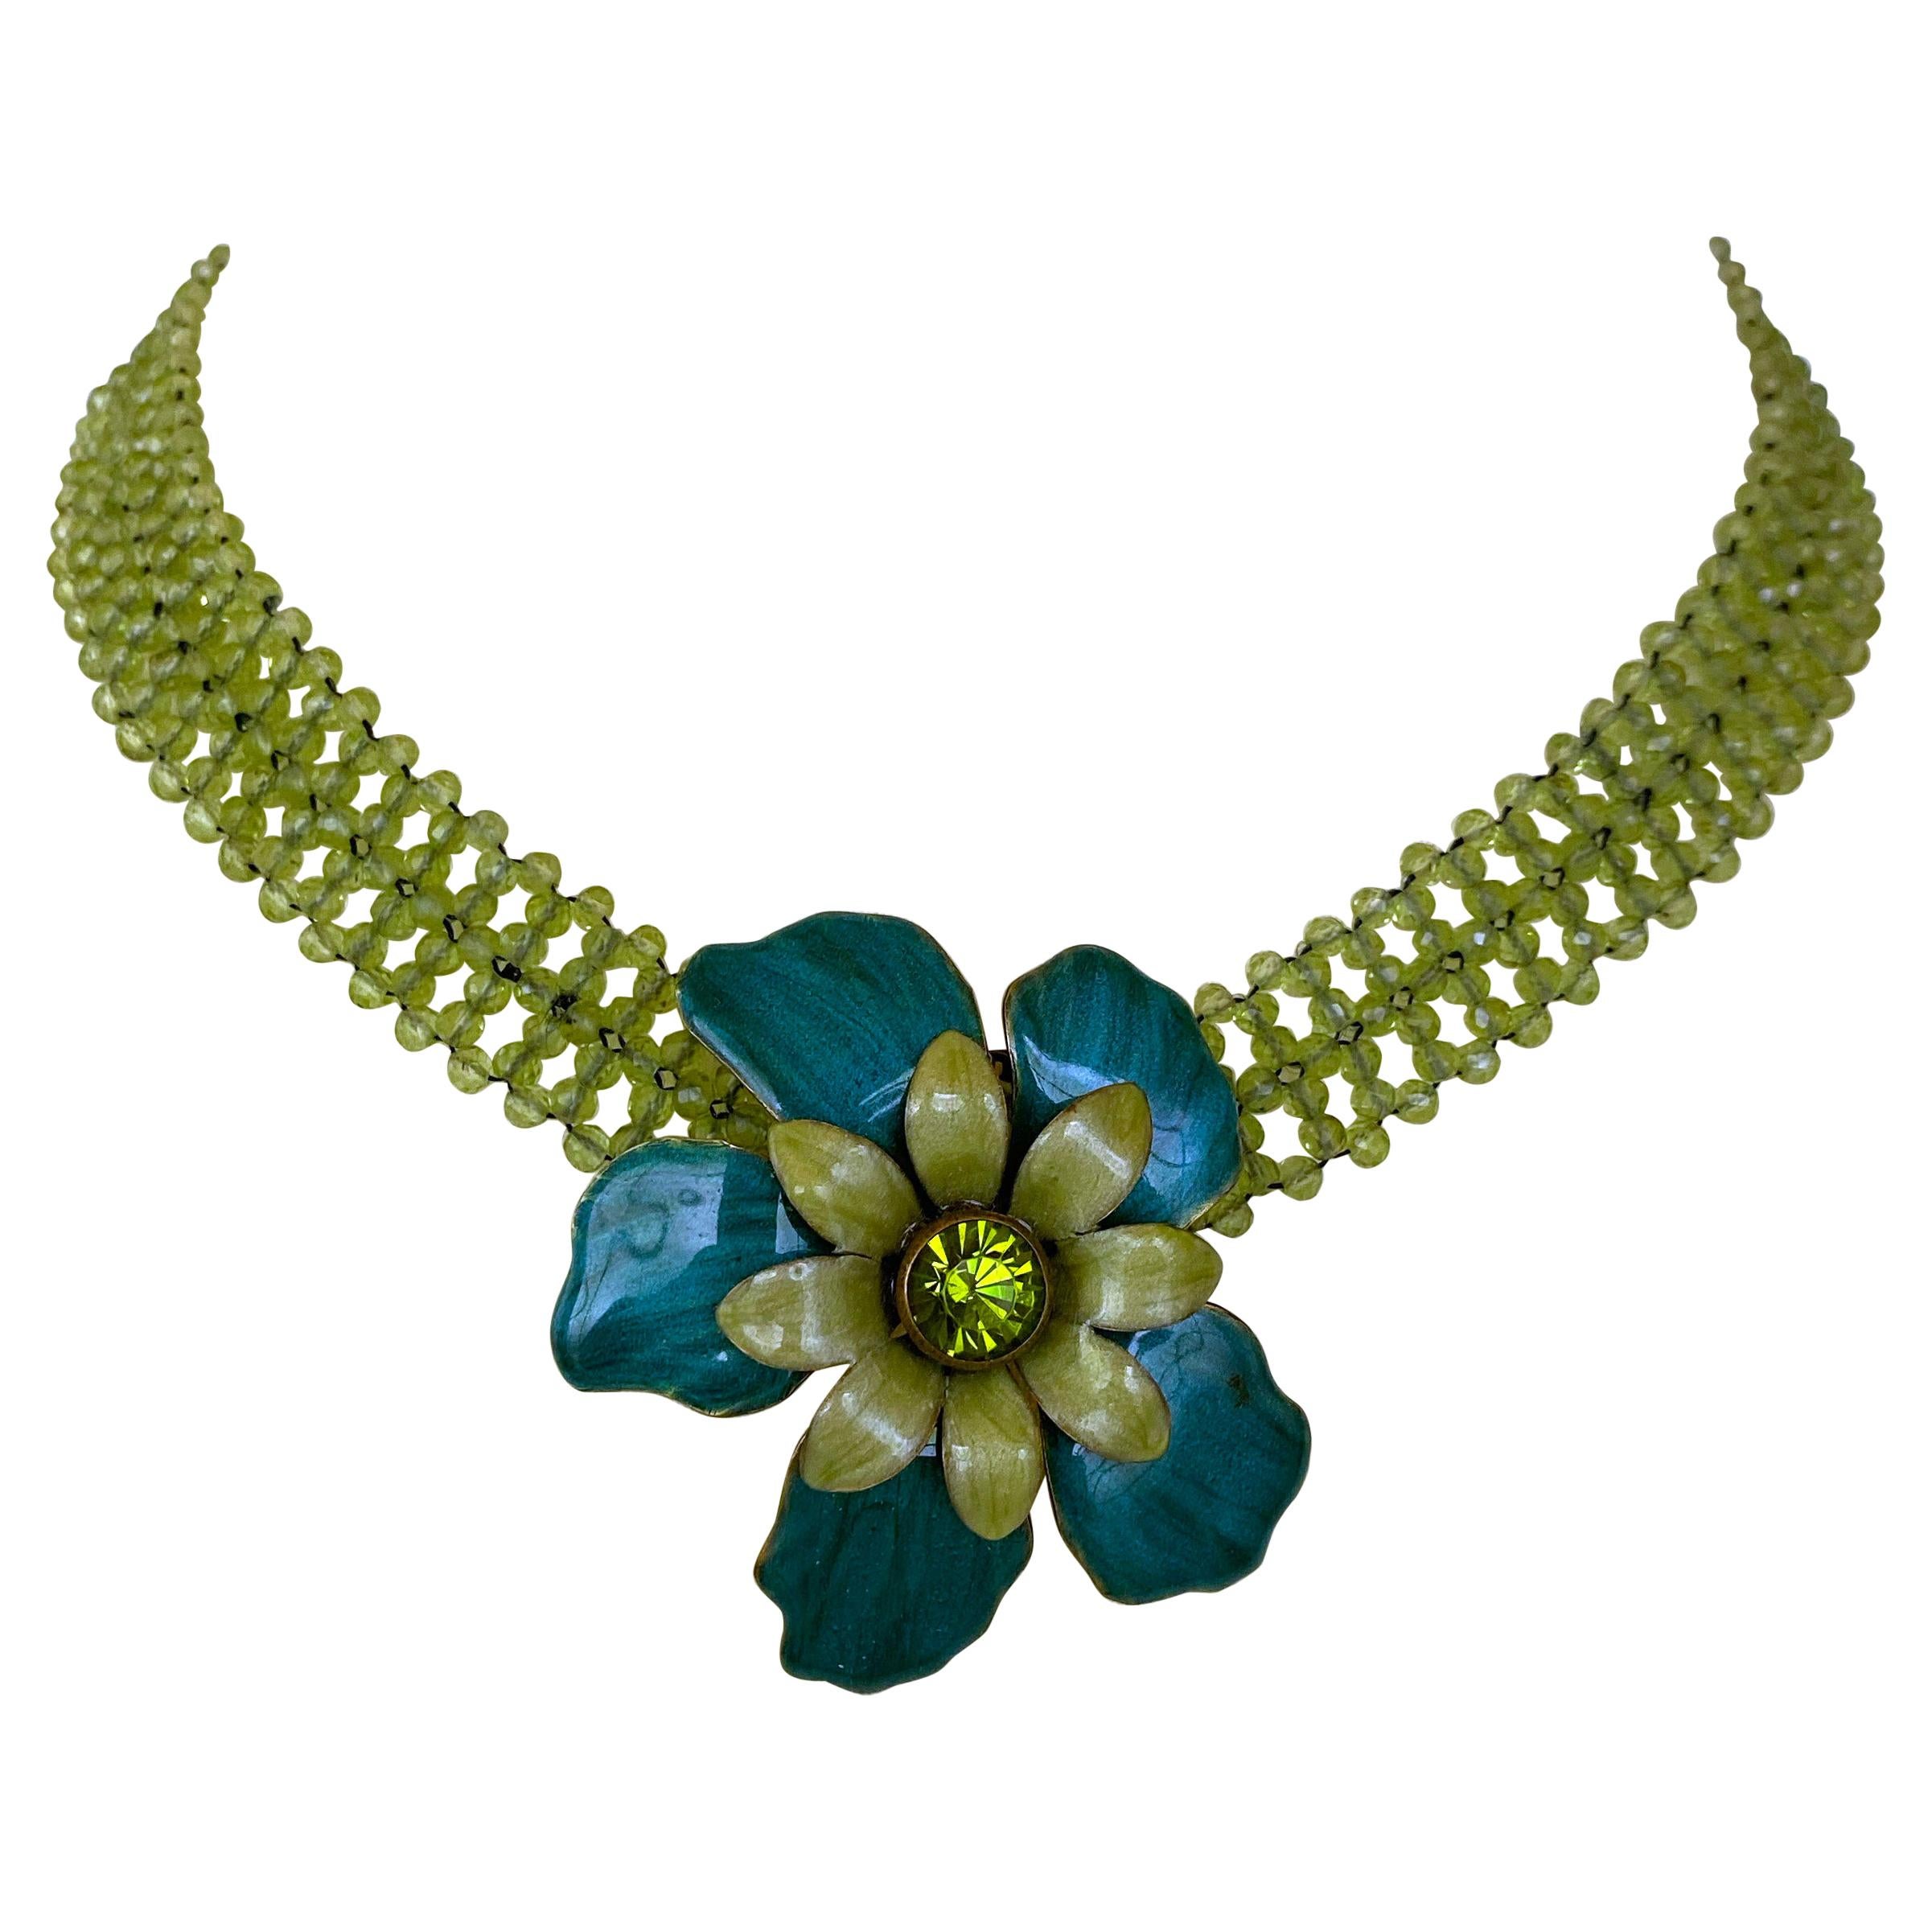 Marina J Woven Faceted Peridot Necklace with 14 K Yellow Gold Sliding Clasp